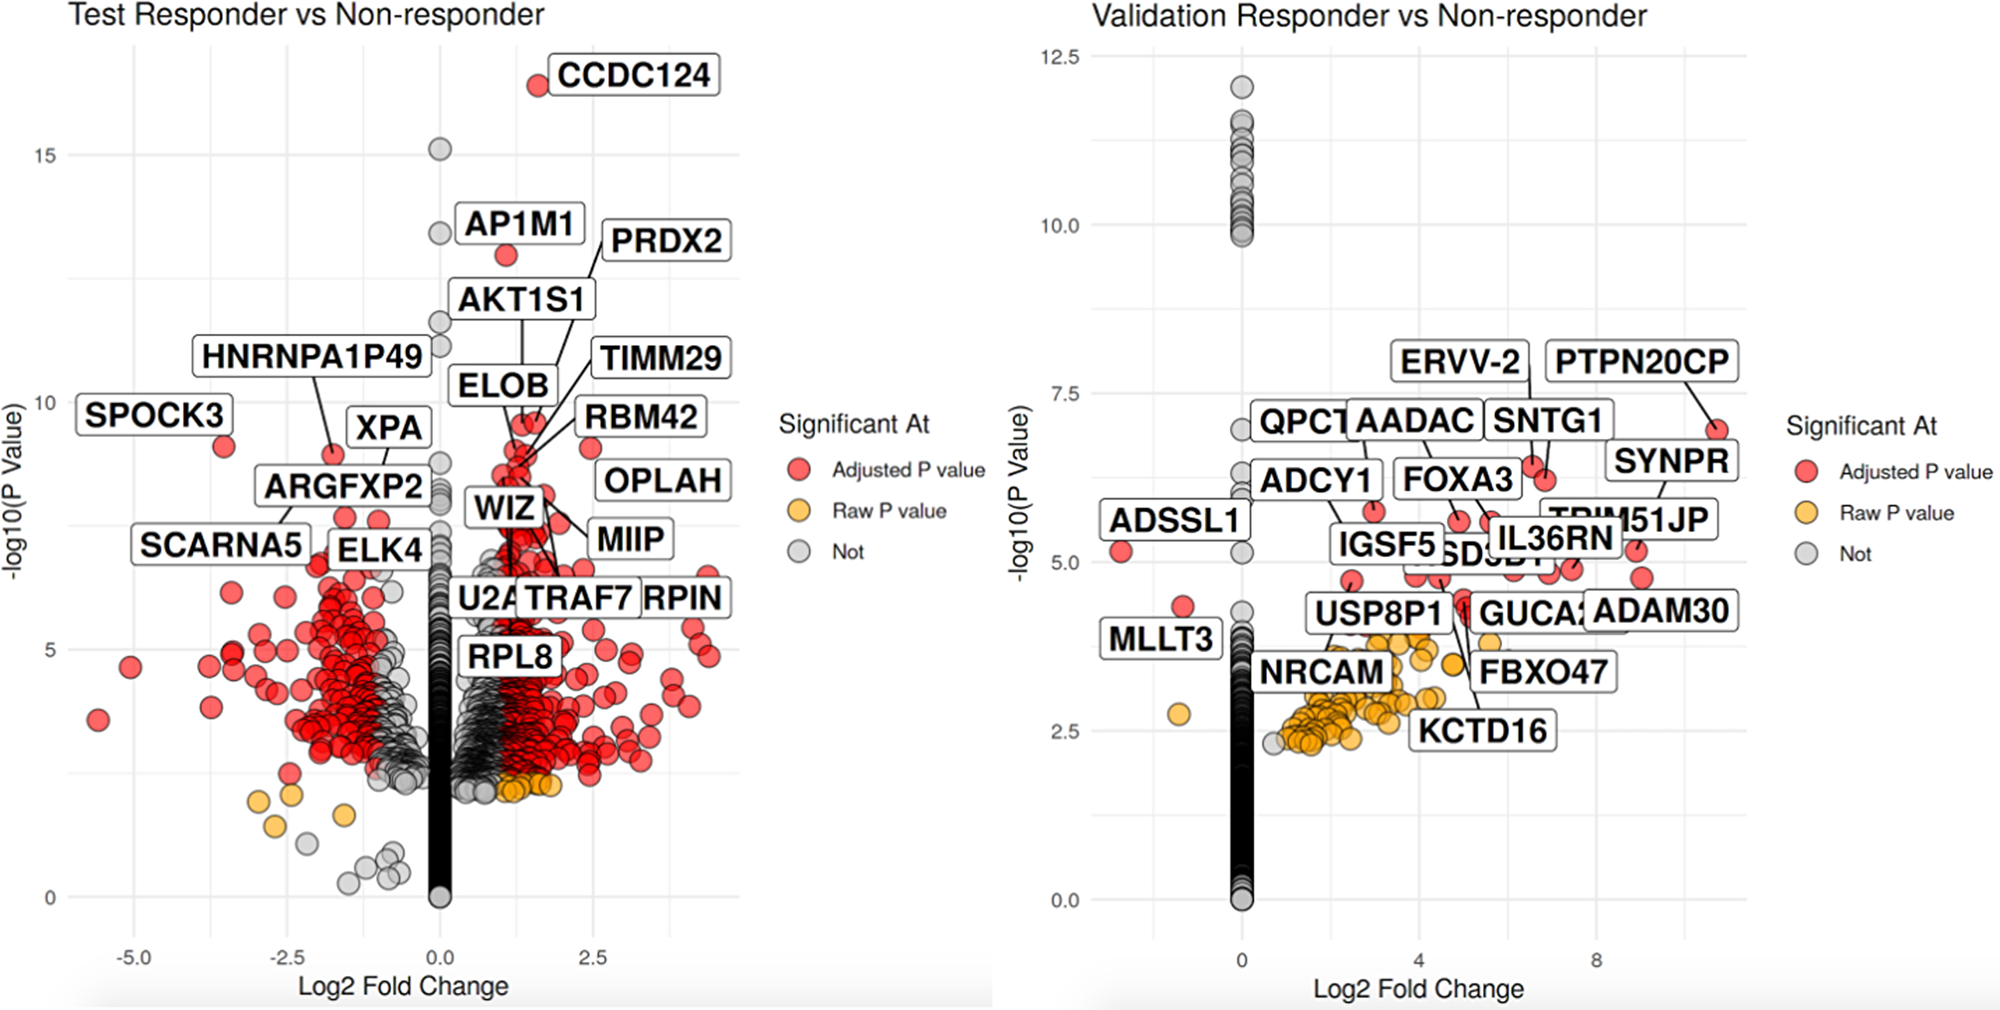 Volcano plot of significant differentially expressed genes with the left volcano being the discovery cohort and validation cohort on the right.